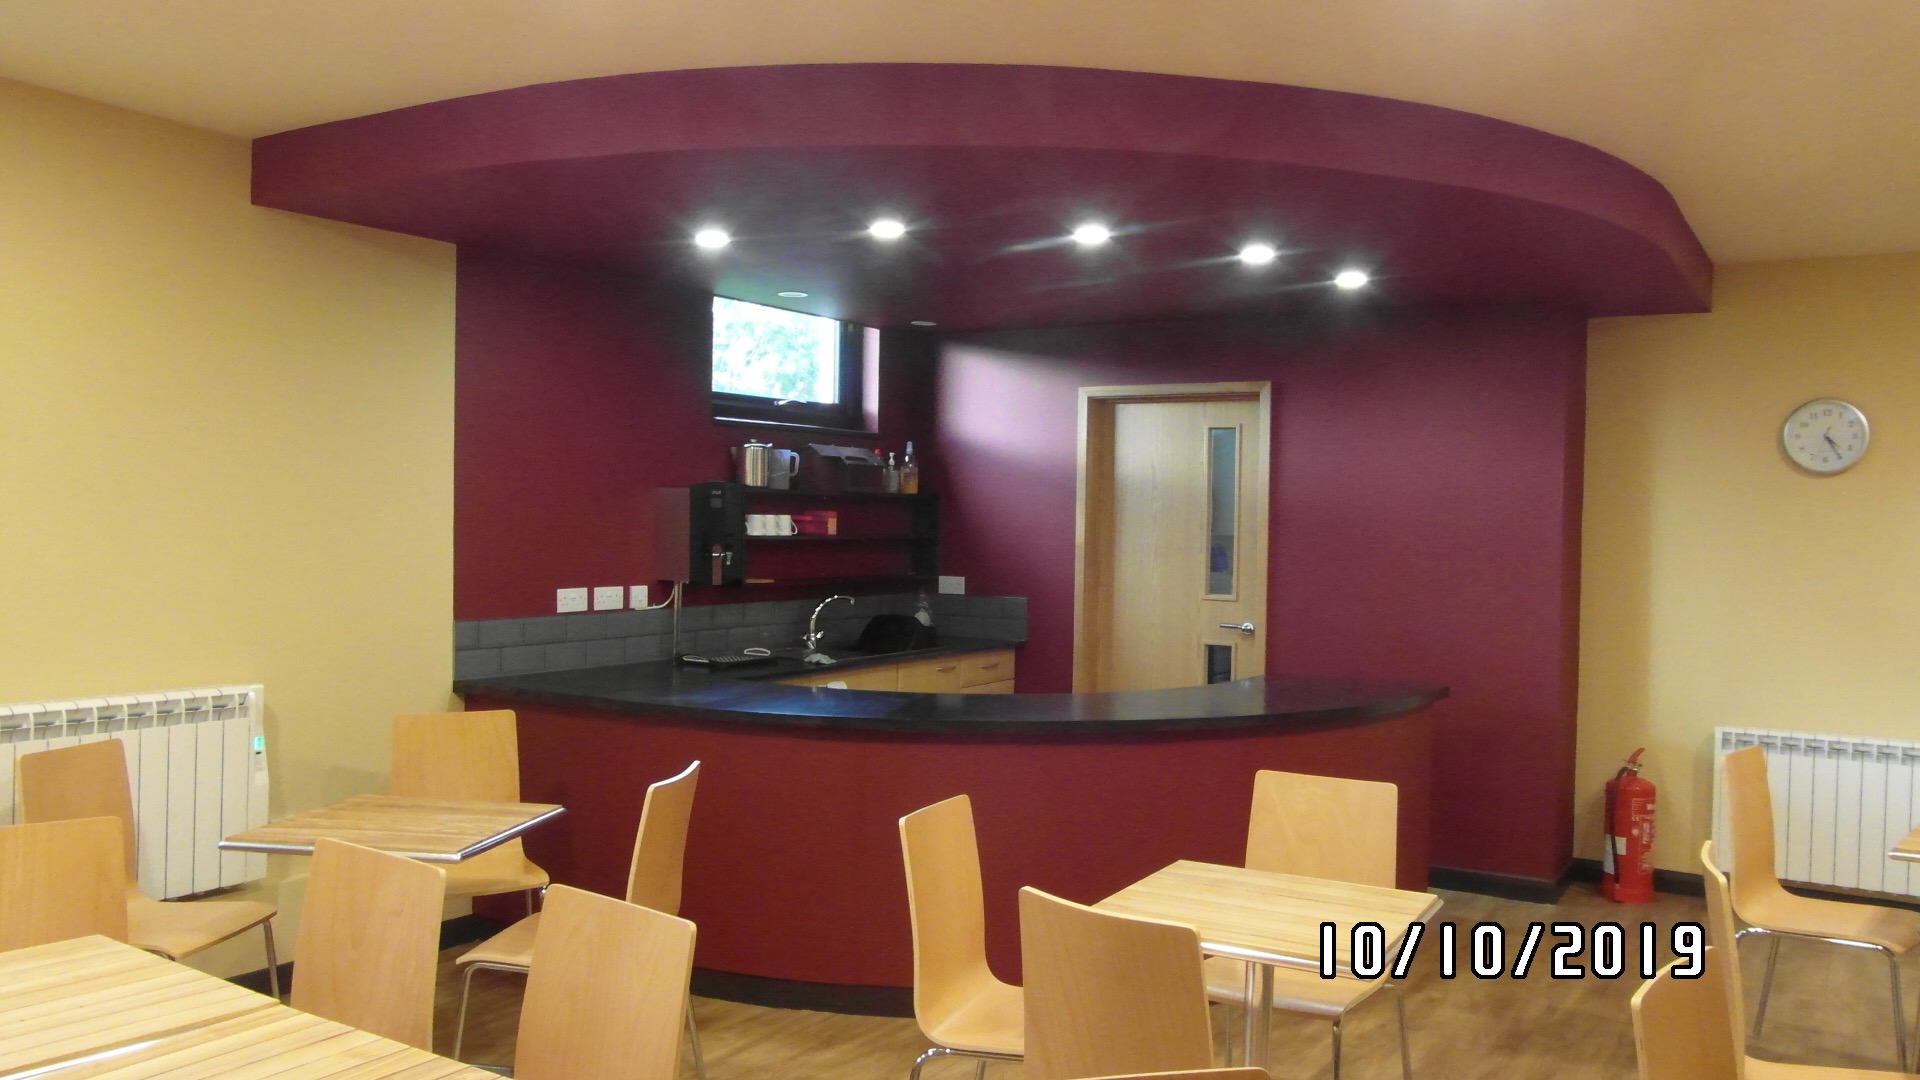 Photo of completed coffee bar area